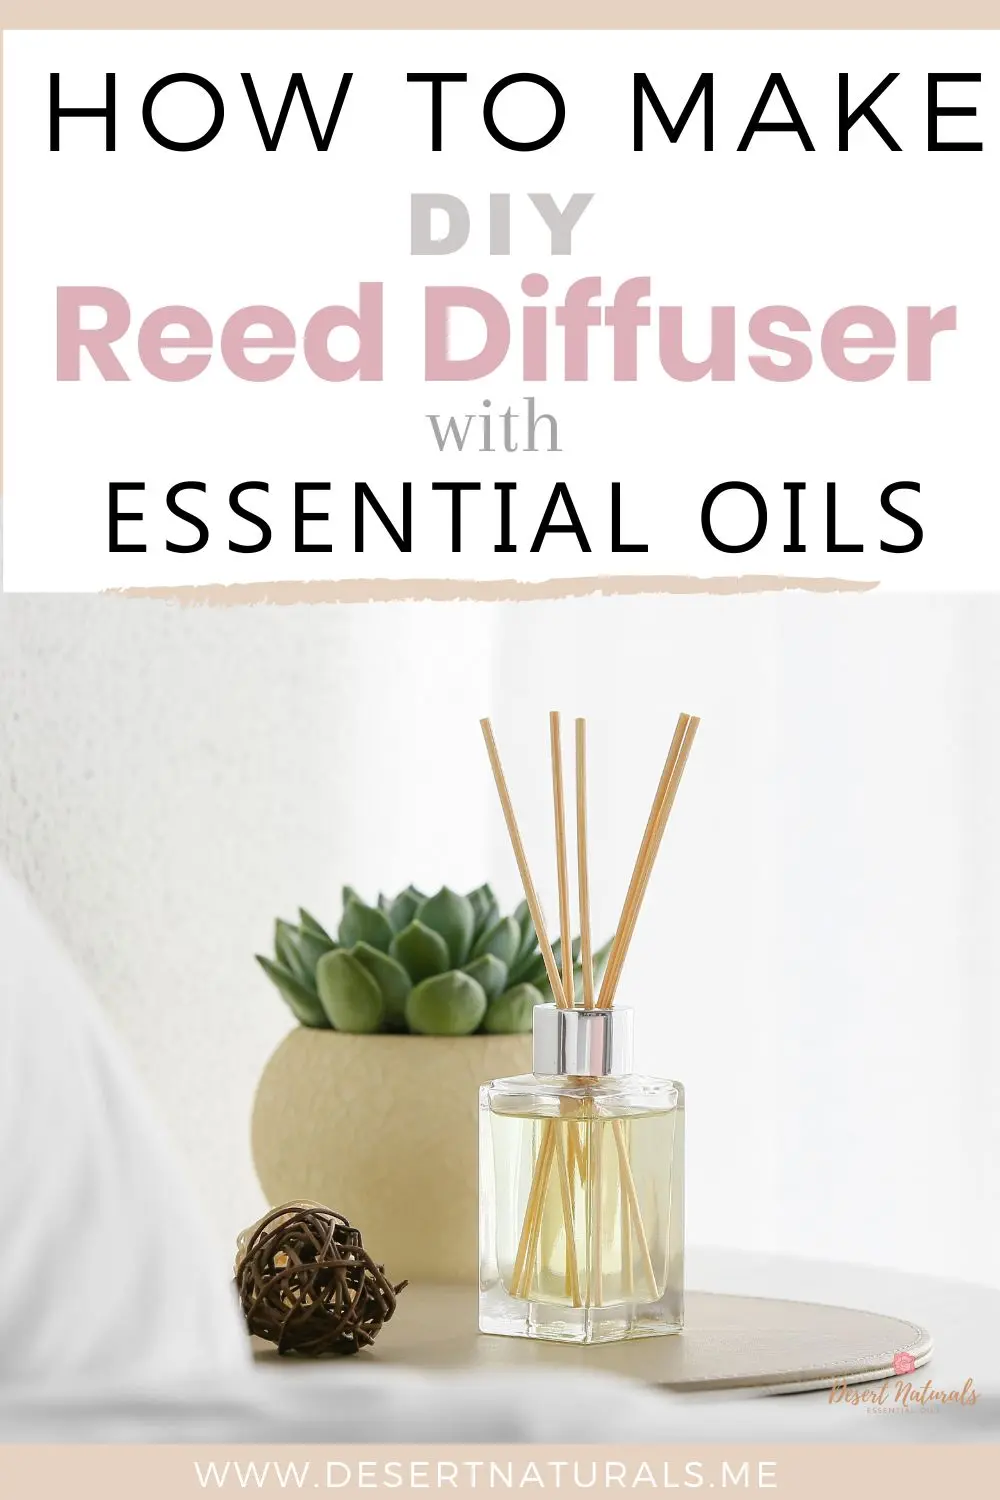 image of diy essential oil reed diffuser with text